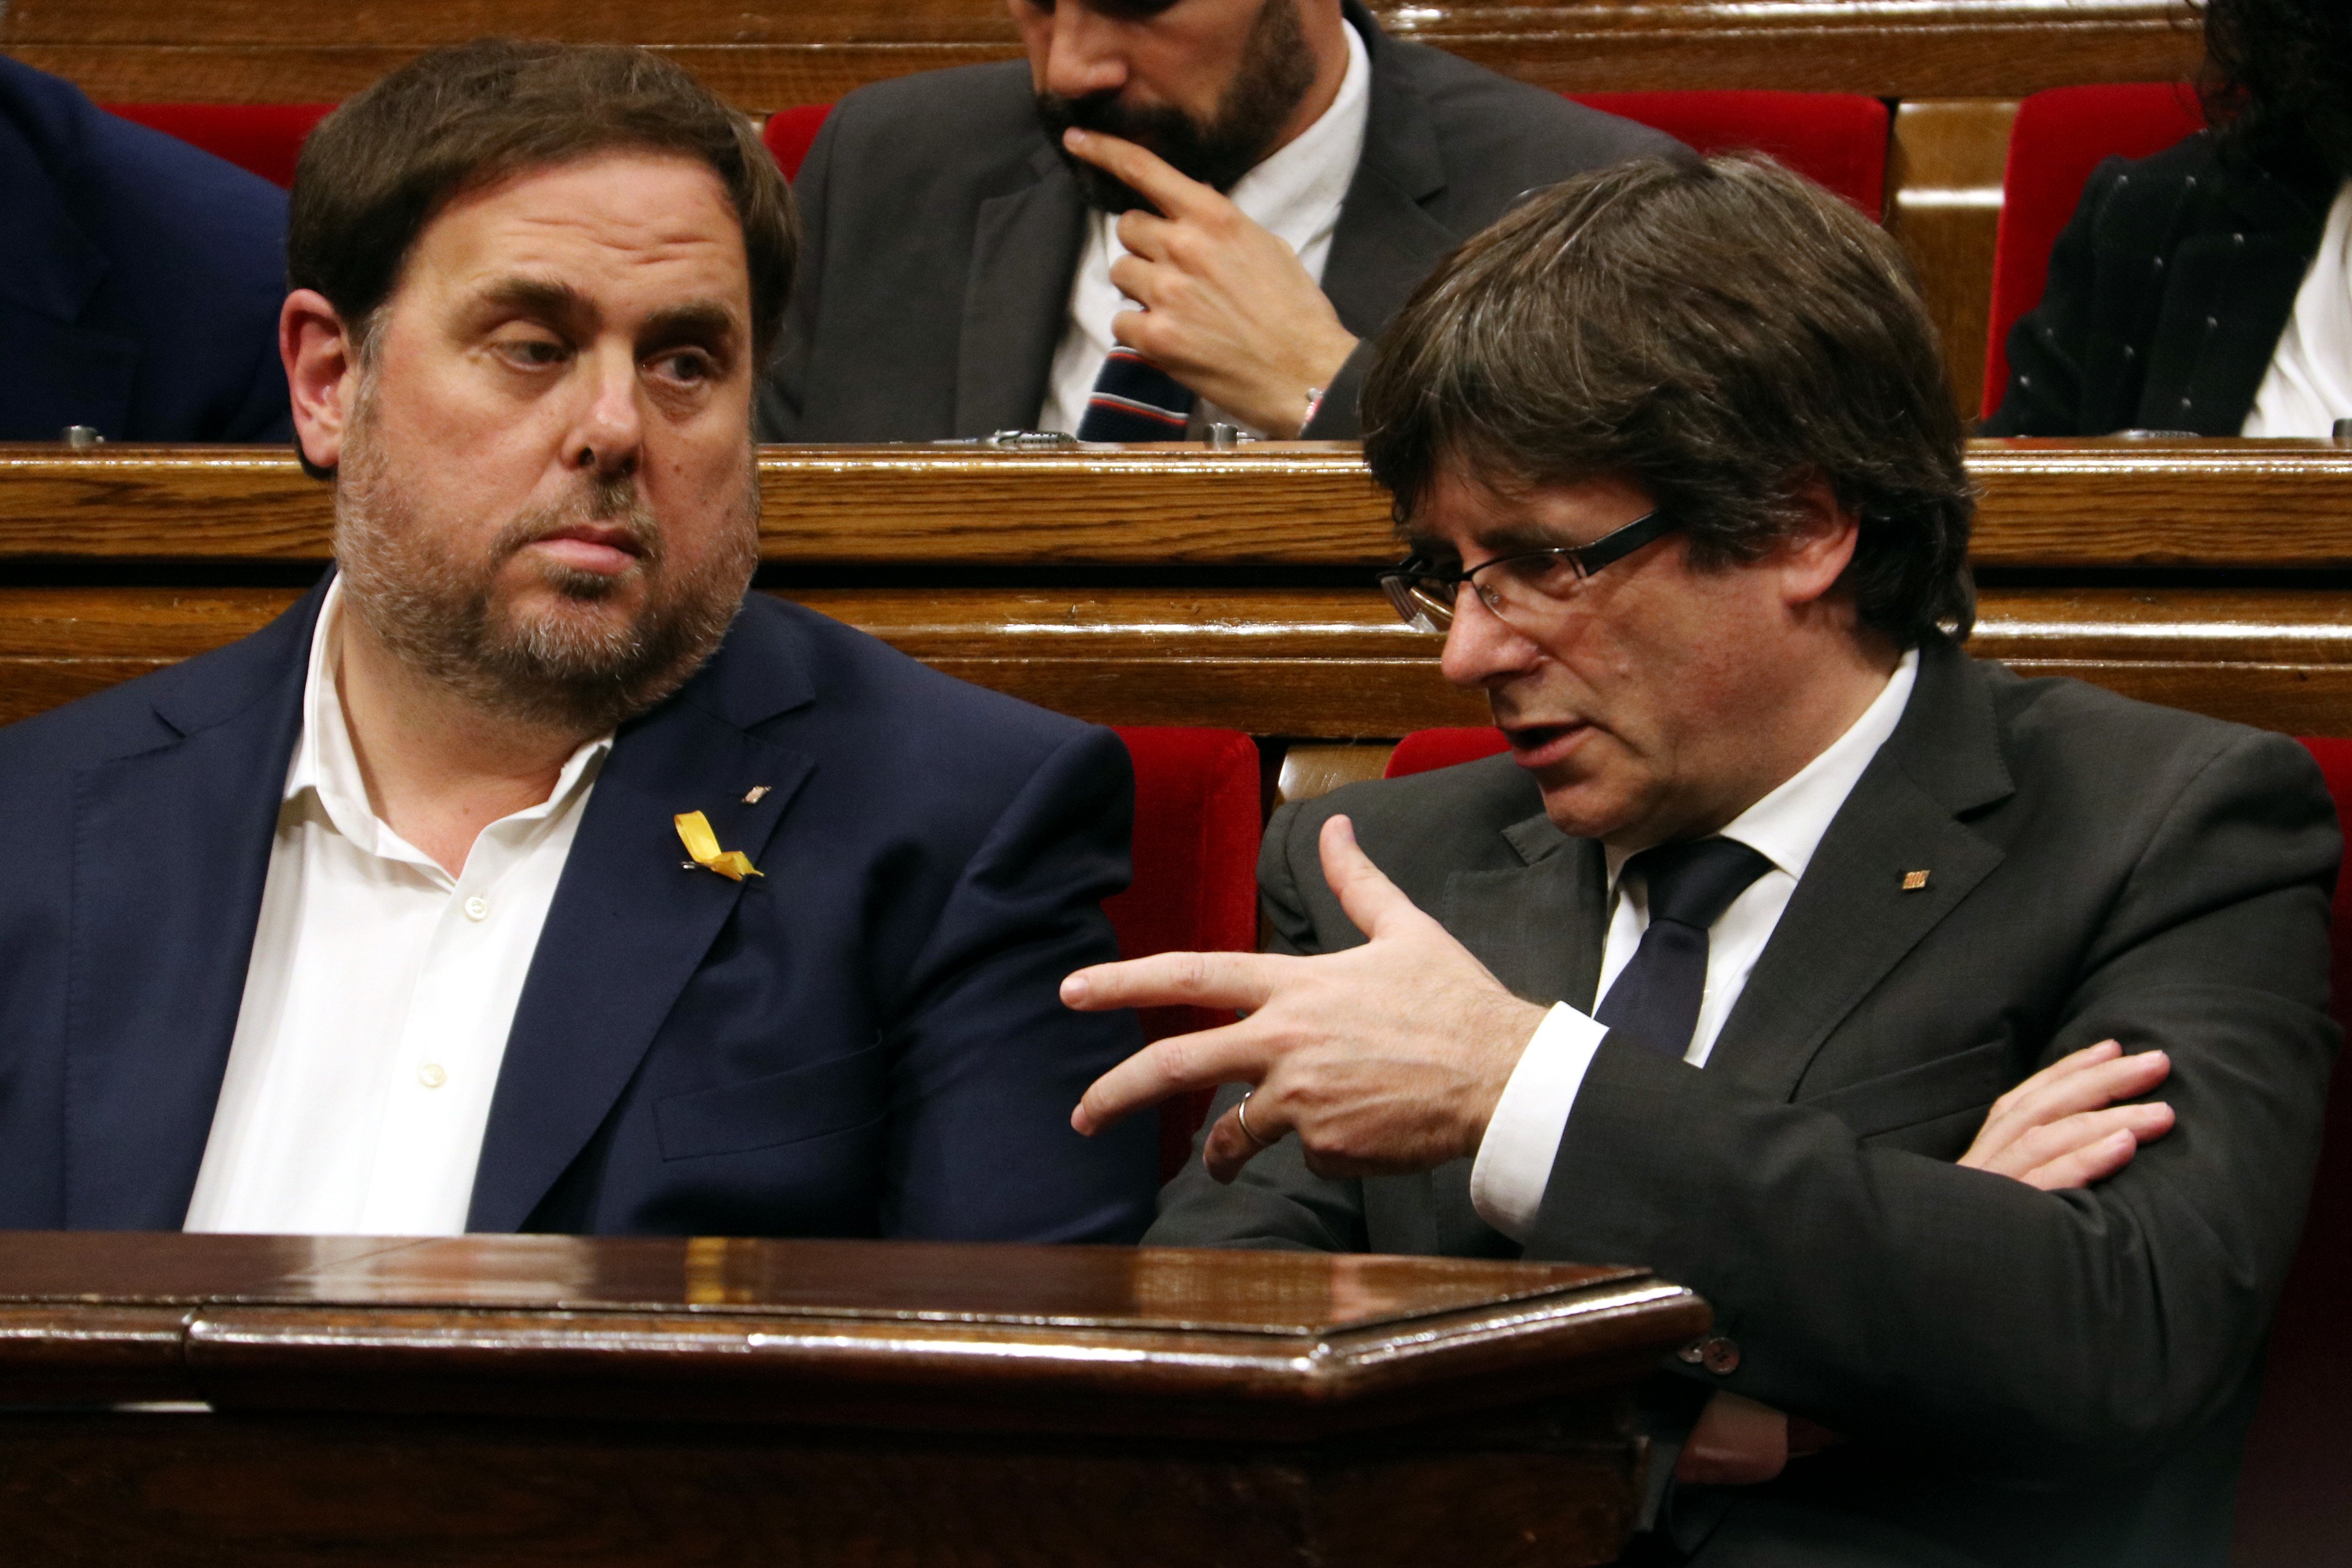 Spain's Court of Accounts provisionally fines Puigdemont's government 4.1 million euros